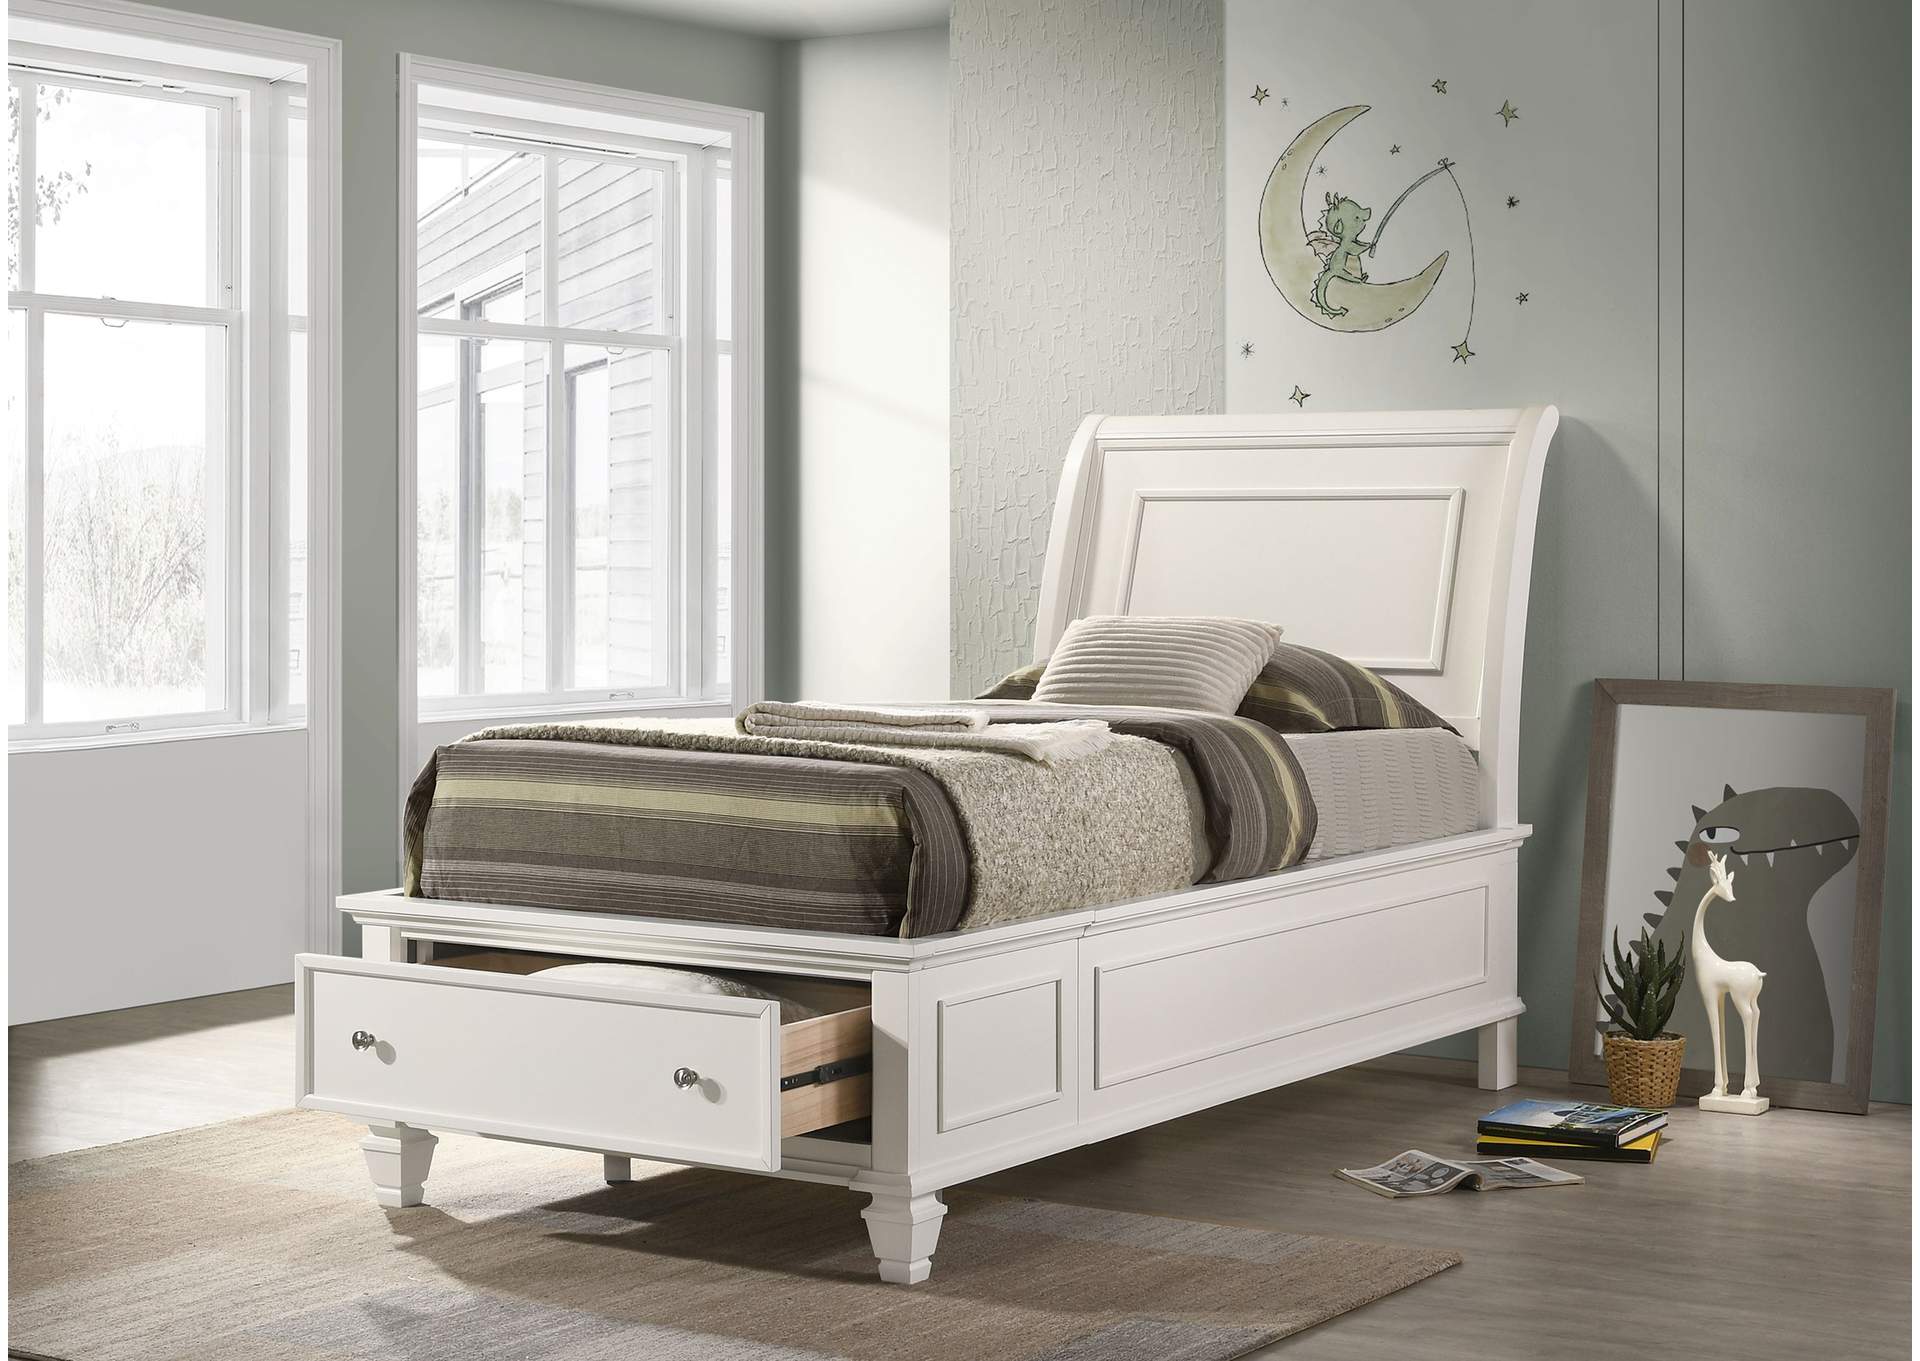 Selena Twin Sleigh Bed with Footboard Storage Buttermilk,Coaster Furniture